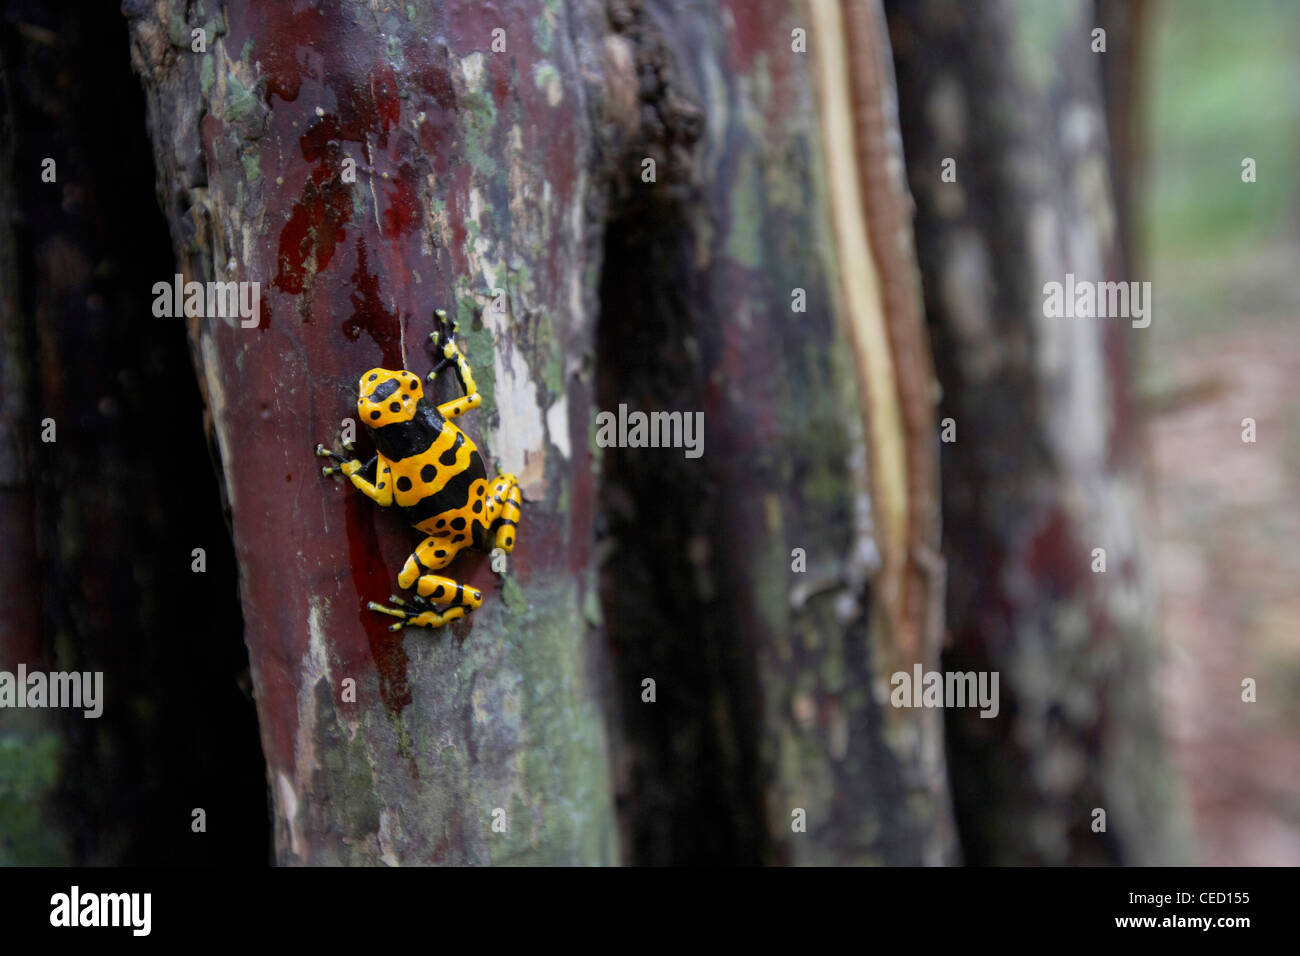 Yellow-banded Poison Dart Frog, Dendrobates leucomelas, in the tropical primary rainforest, Rewa, Guyana, South America Stock Photo